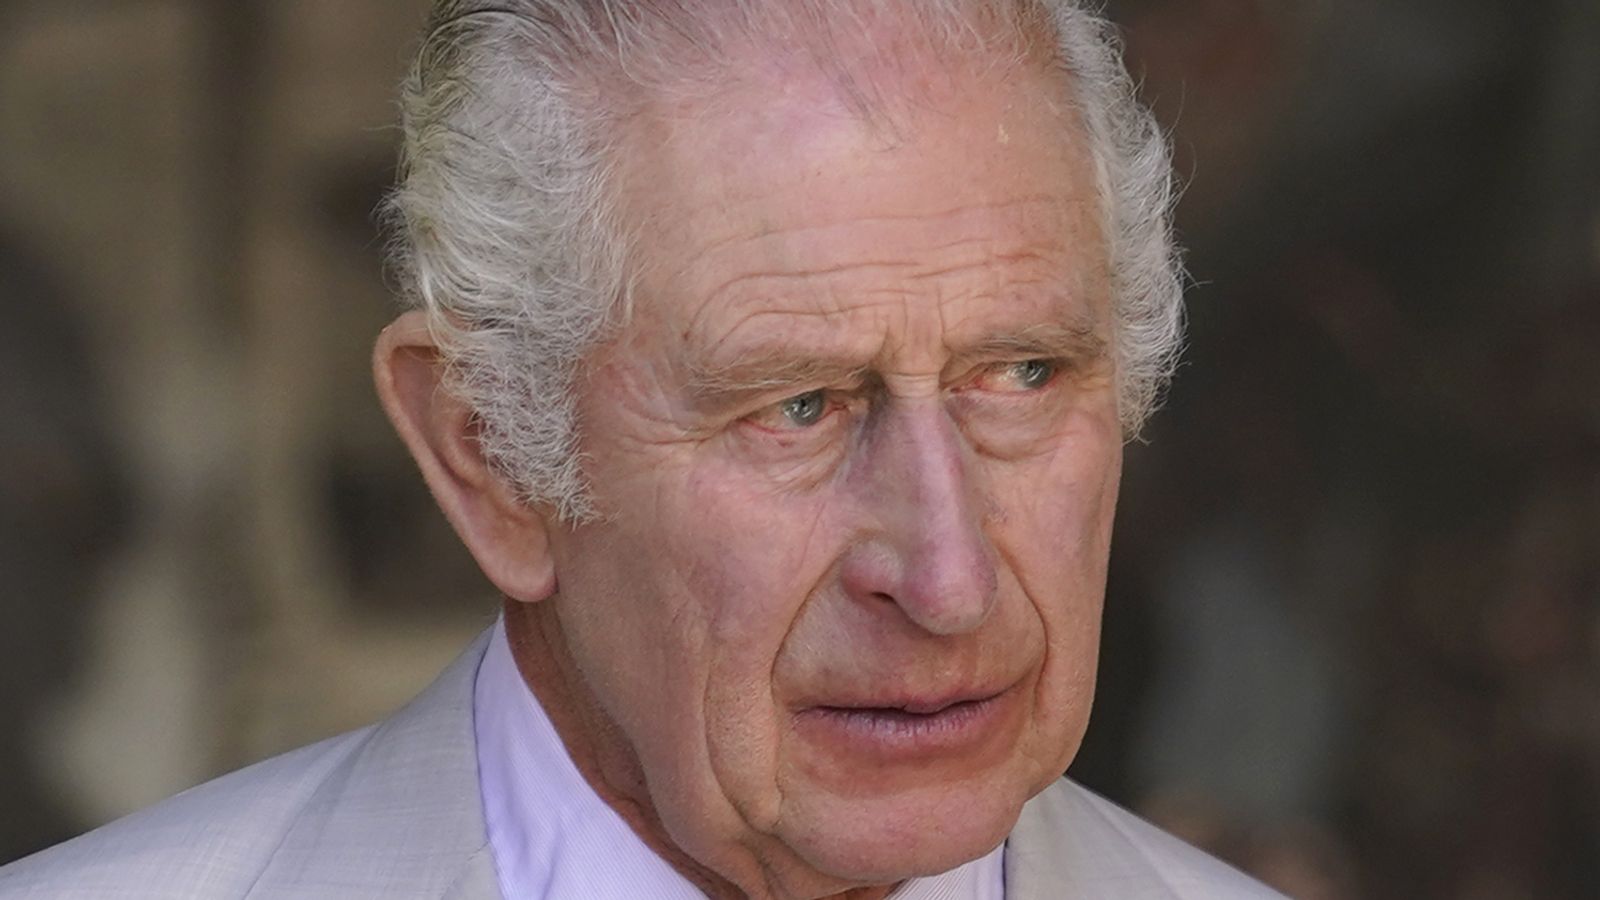 King Charles III undergoes treatment for enlarged prostate